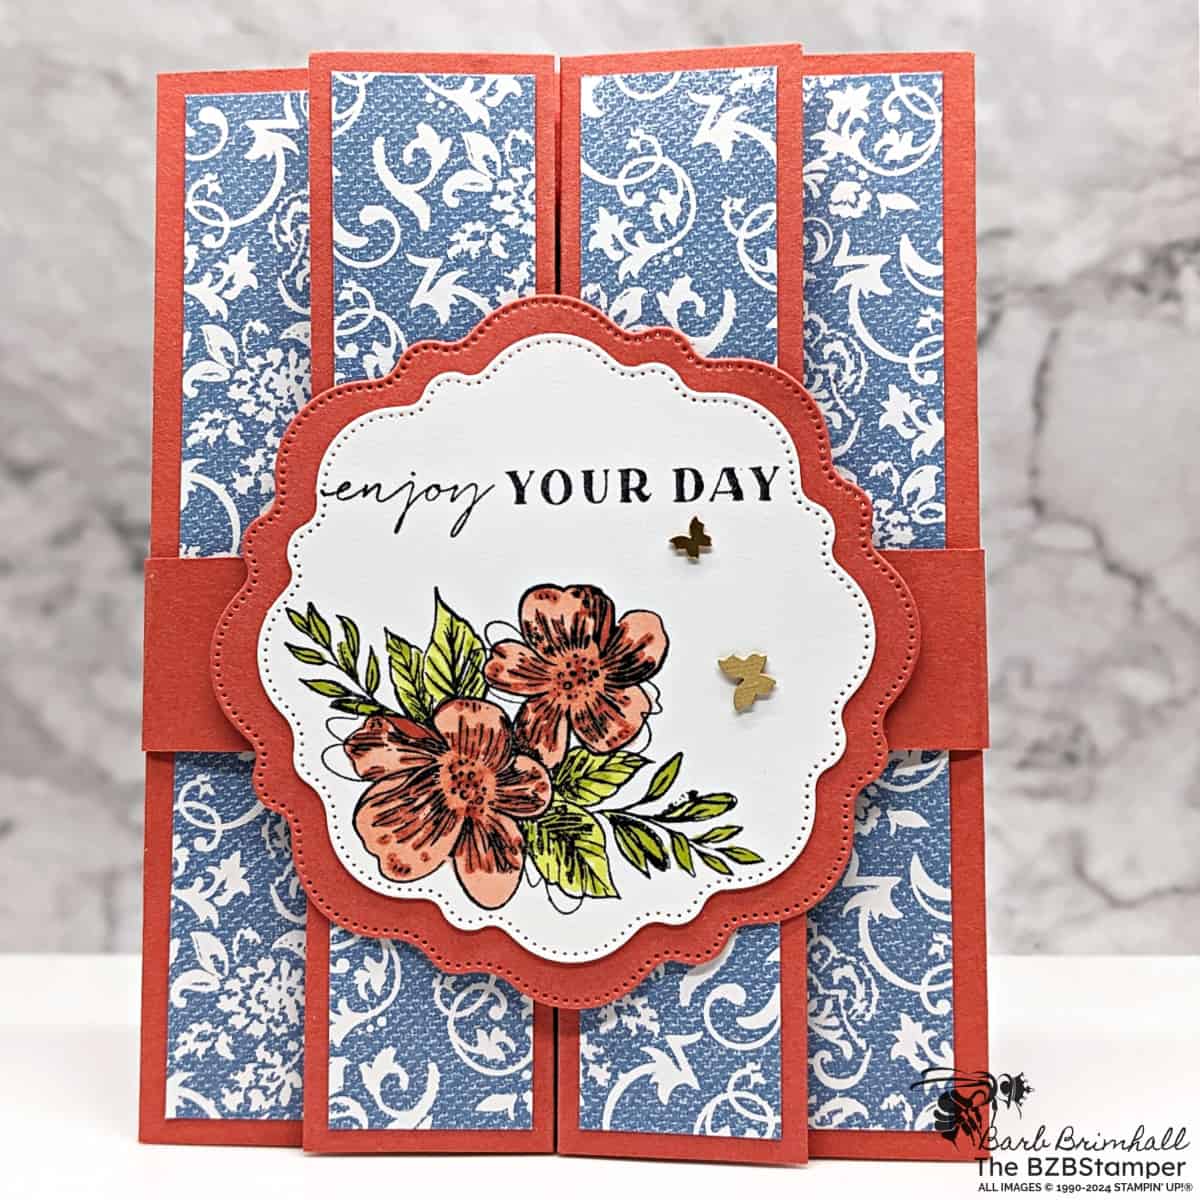 Fun Fold Thoughtful Expressions Card featuring flowers in orange and green, with an "enjoy your day" sentiment and butterfly embellishments.